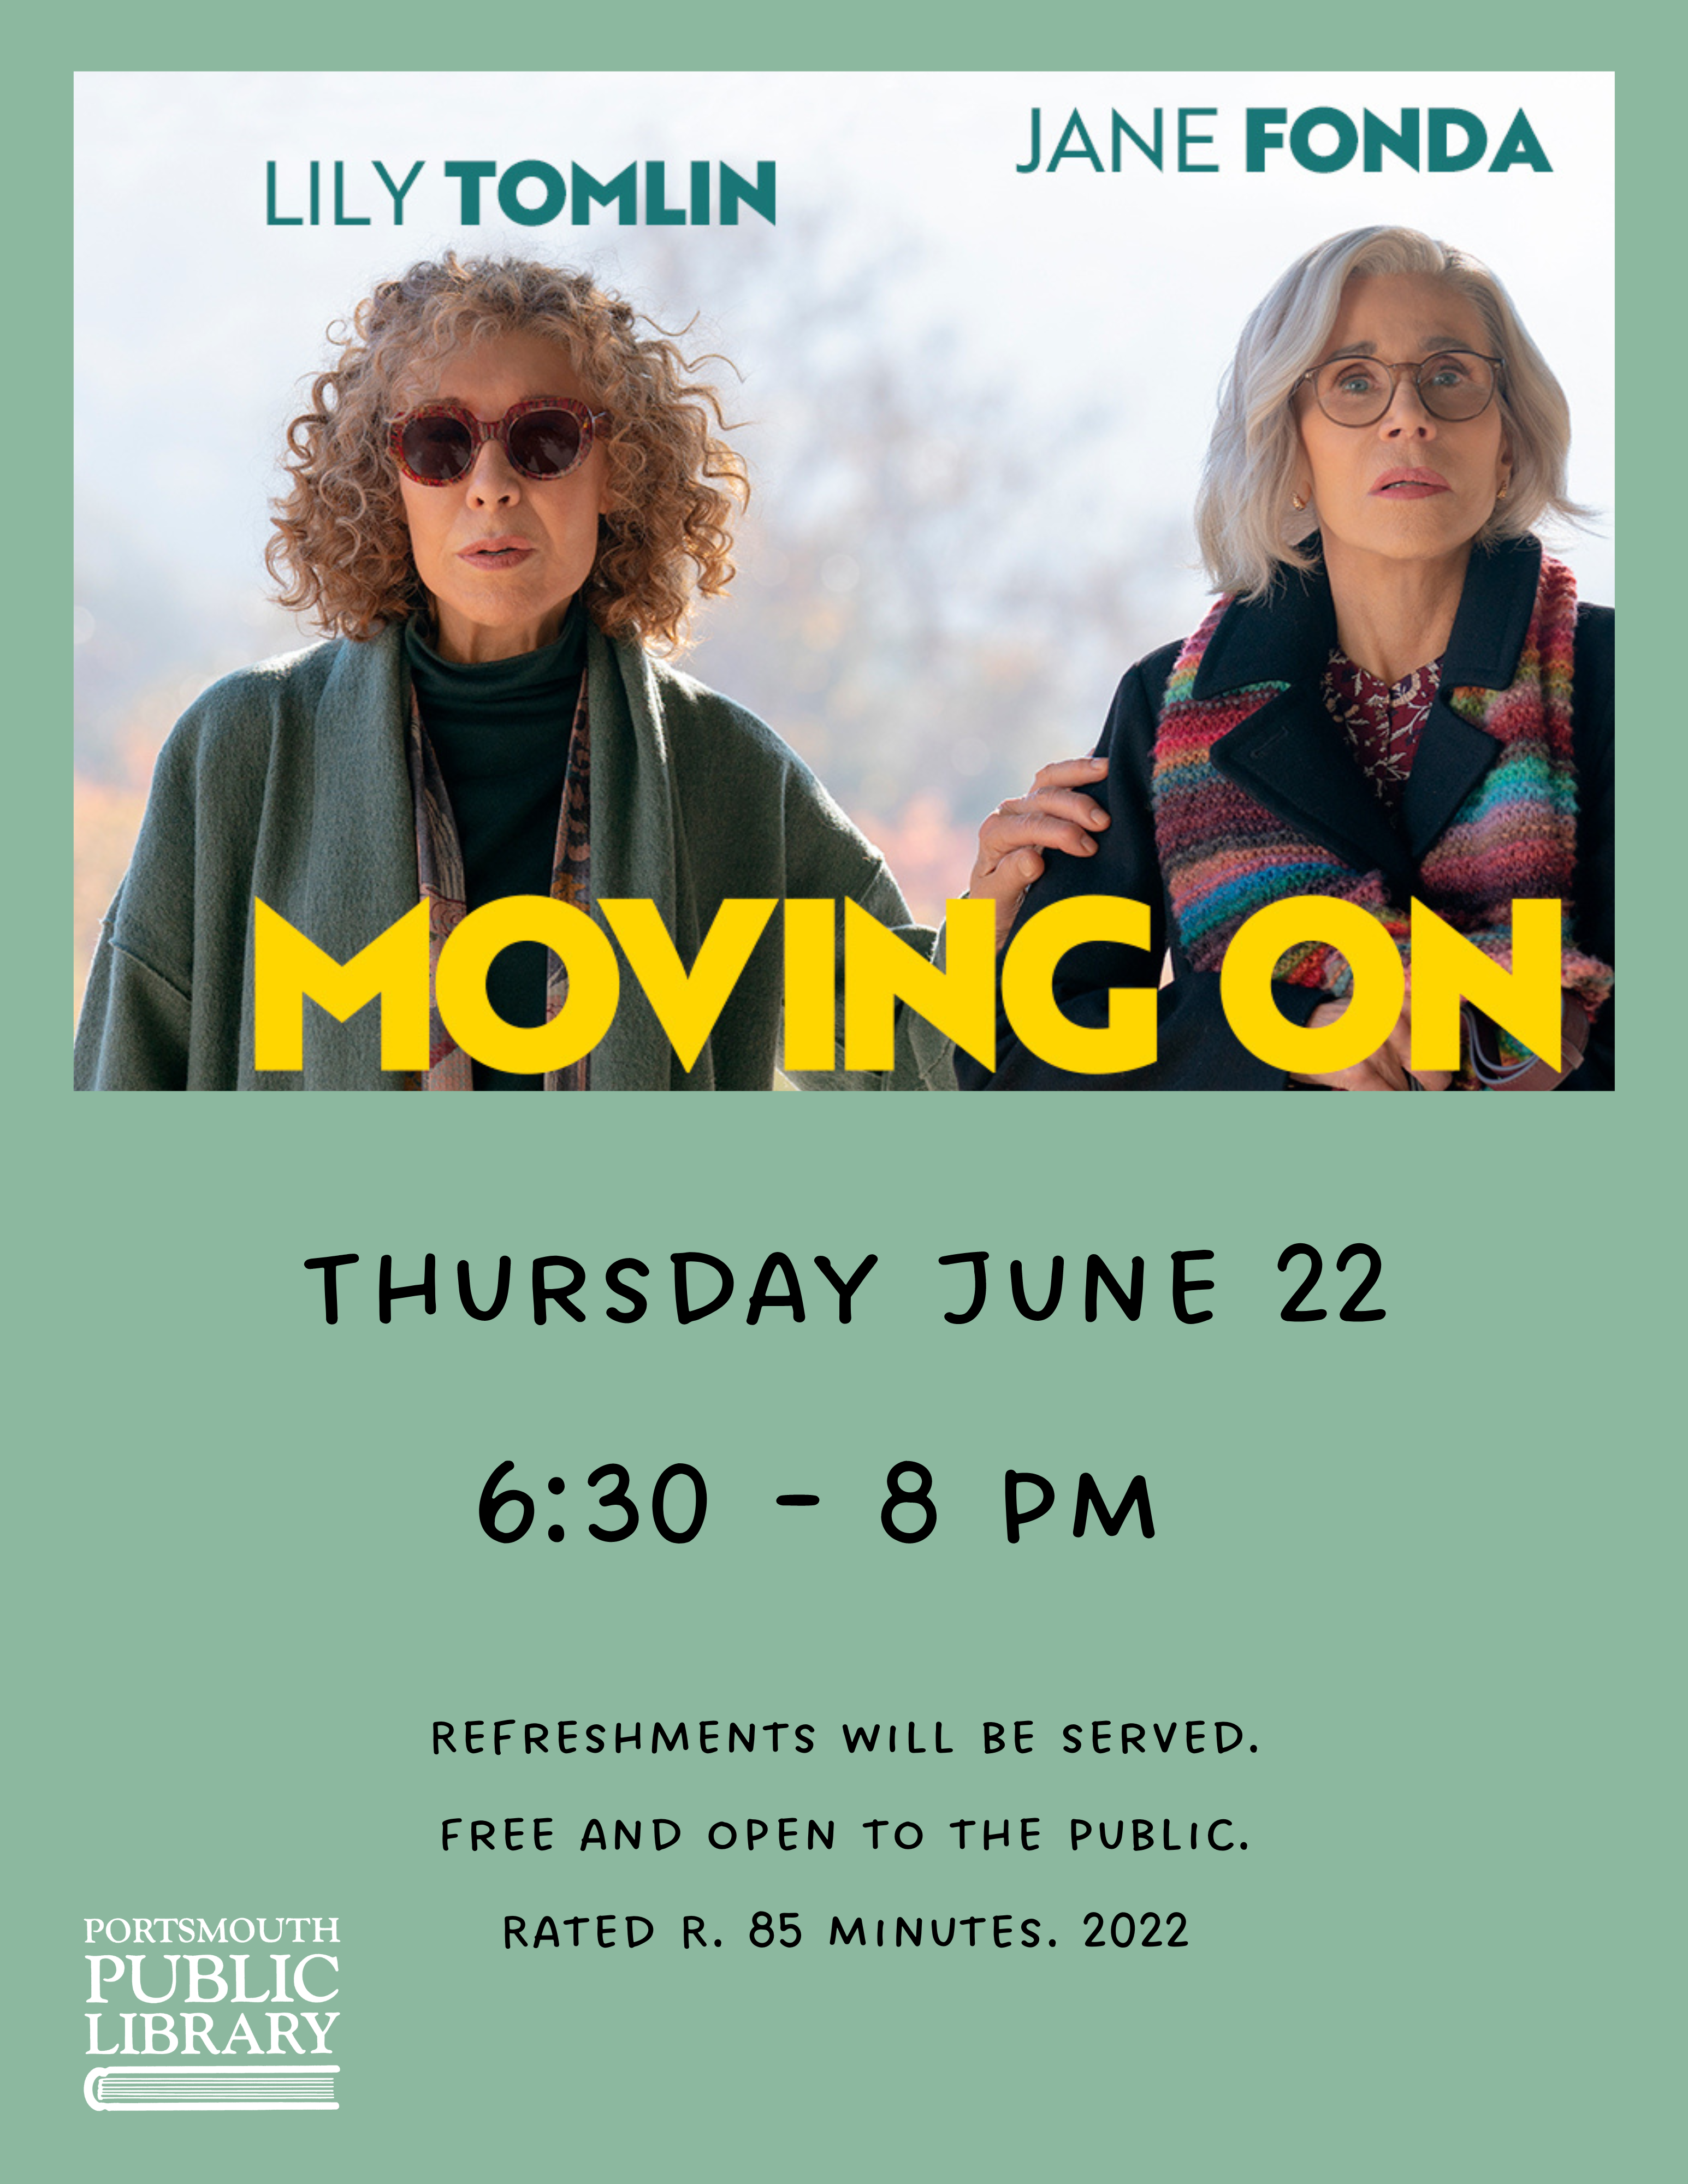 Moving On Lily Tomlin Jane Fonda Thursday June 22 6:30-8 PM  Free and Open to the Public Refreshments will be served Rated R 85 Minutes 2022